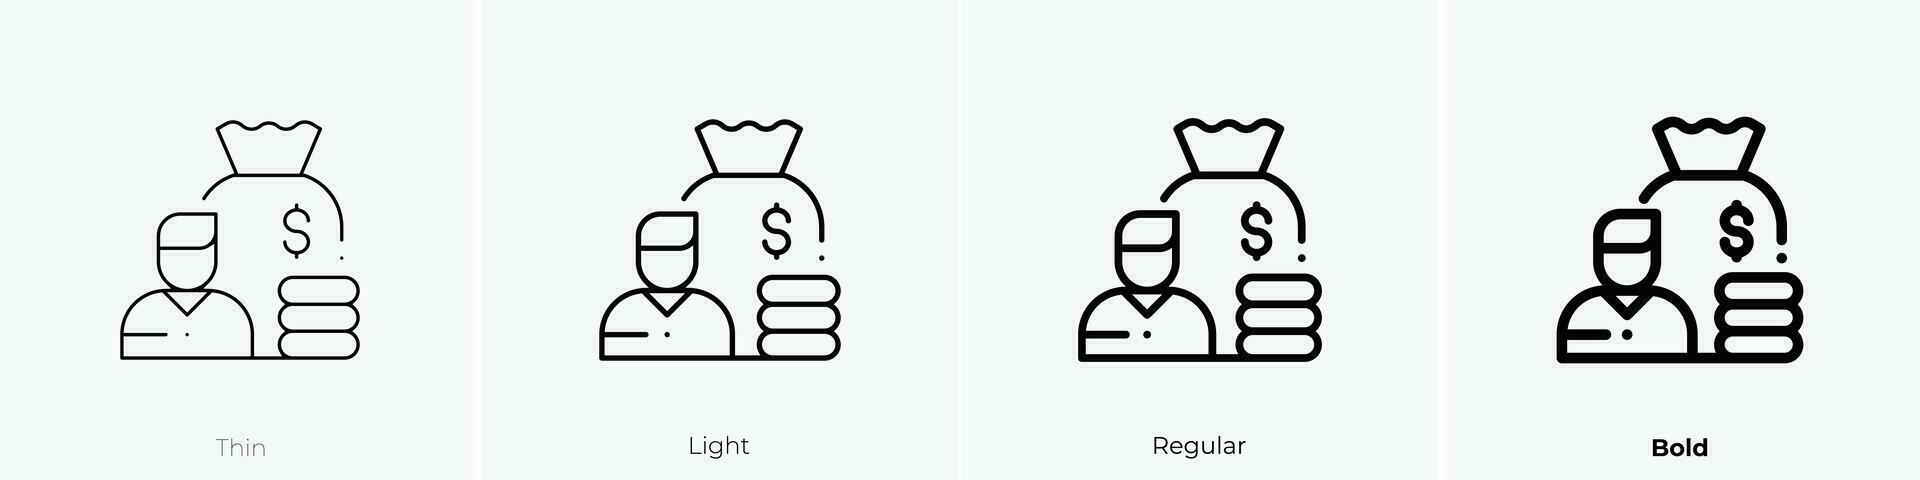 salary icon. Thin, Light, Regular And Bold style design isolated on white background vector